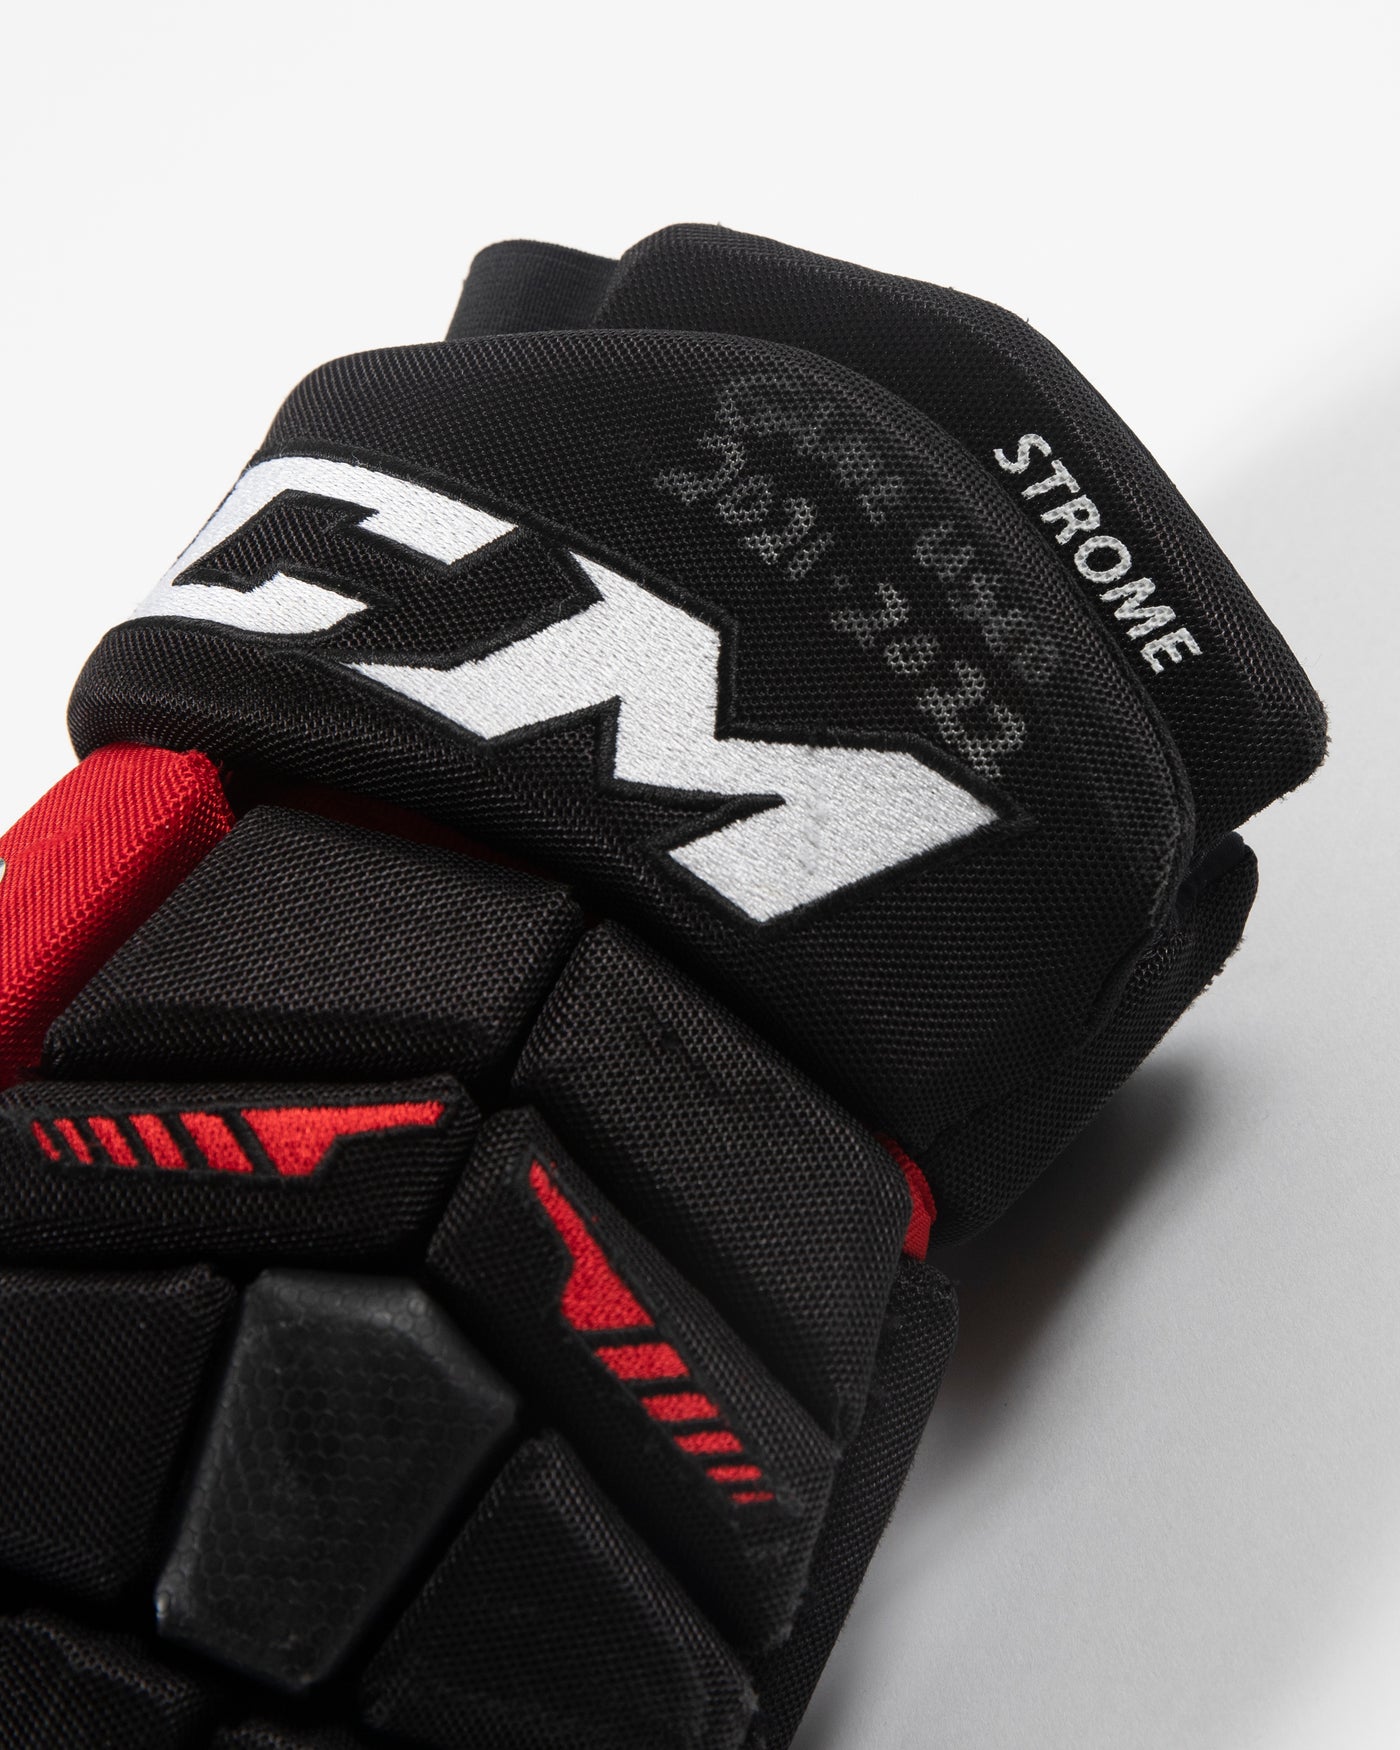 Autographed Chicago Blackhawks CCM Dylan Strome game used hockey gloves - close up of player label